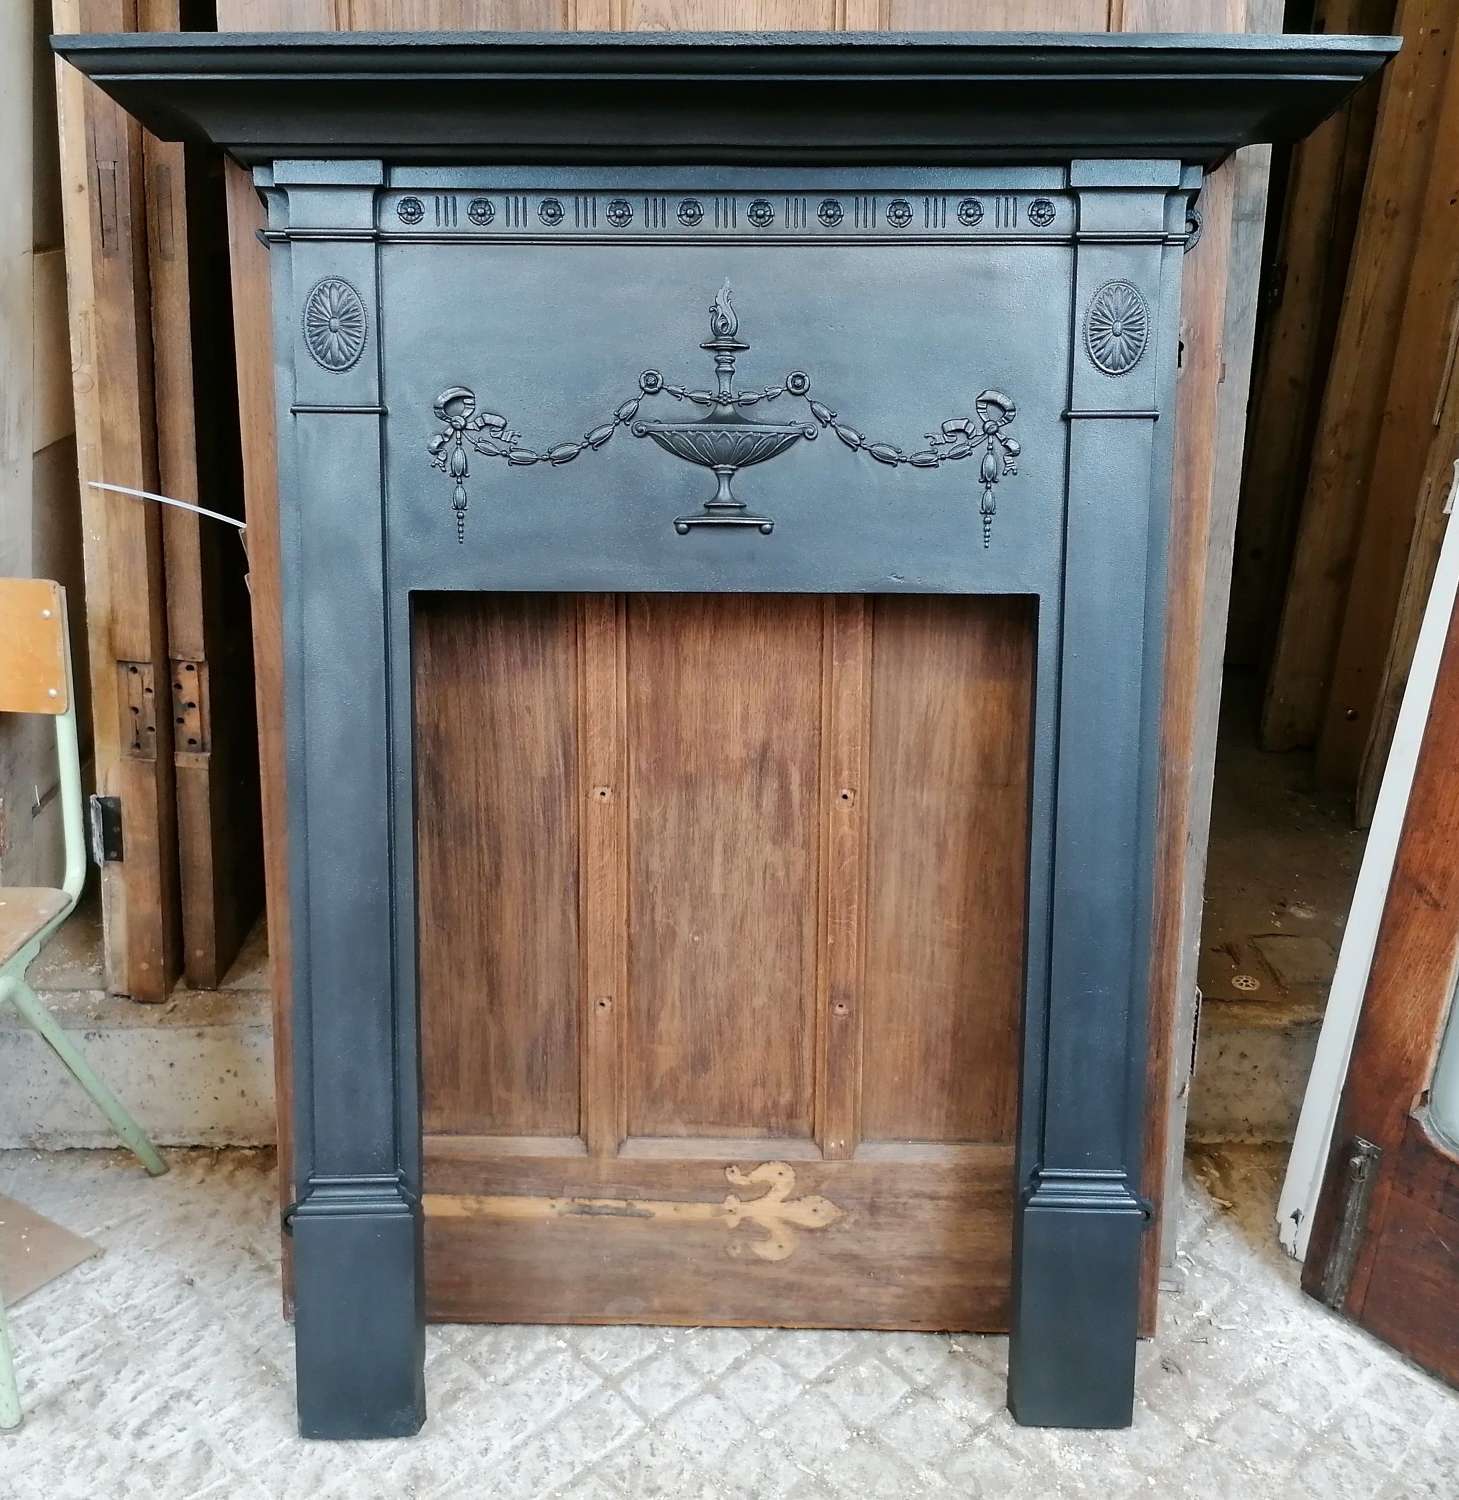 FS0149 RECLAIMED EDWARDIAN CAST IRON FIRE SURROUND FOR WOOD BURNER